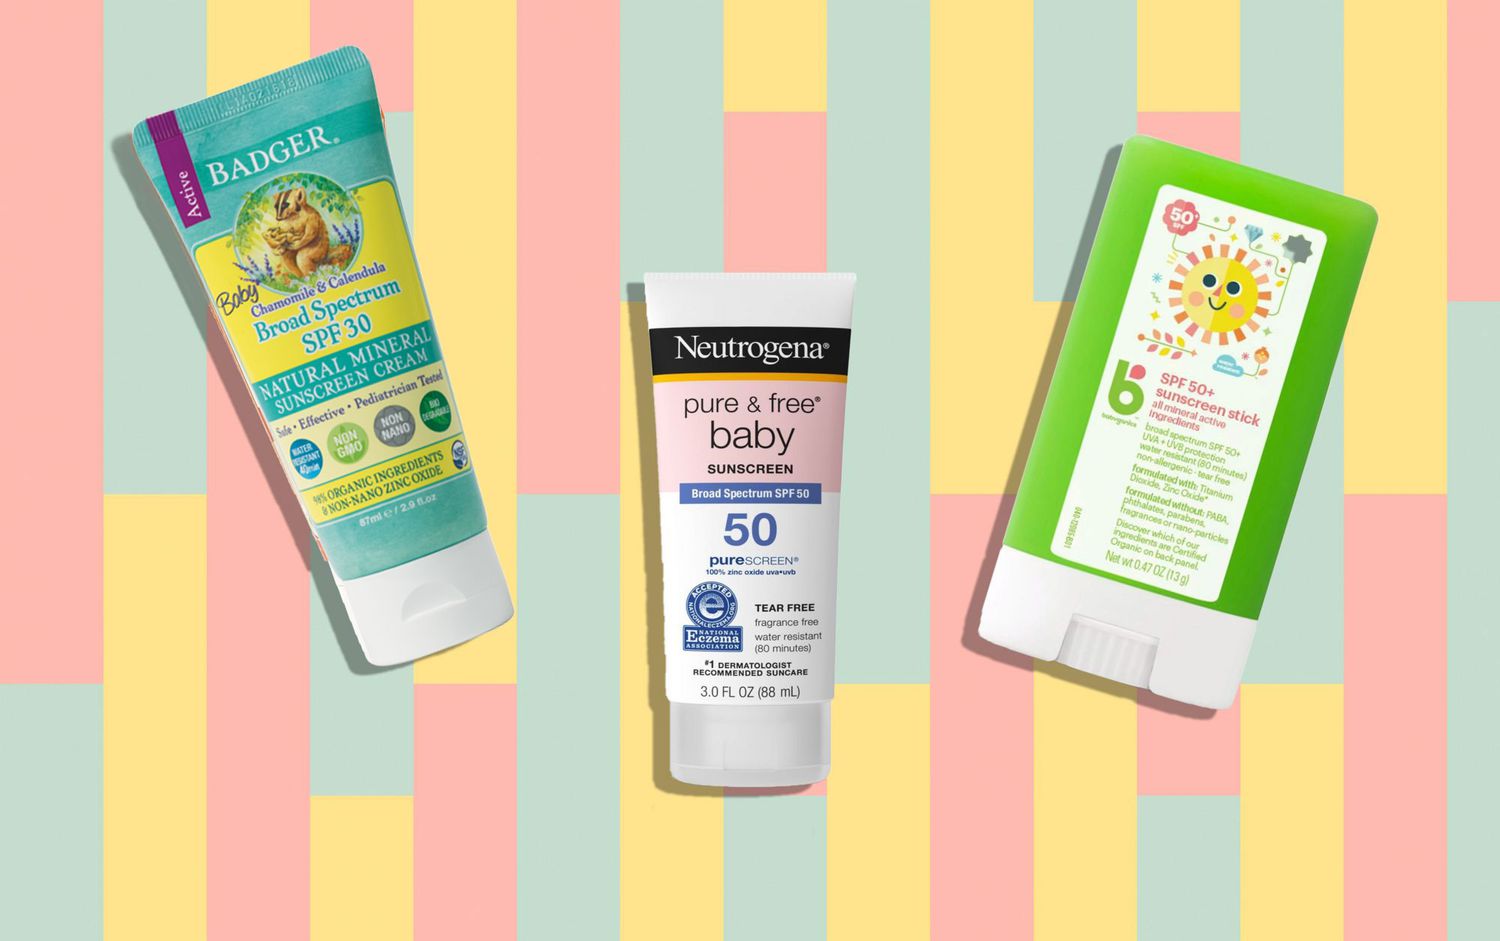 A composition of baby sunscreens